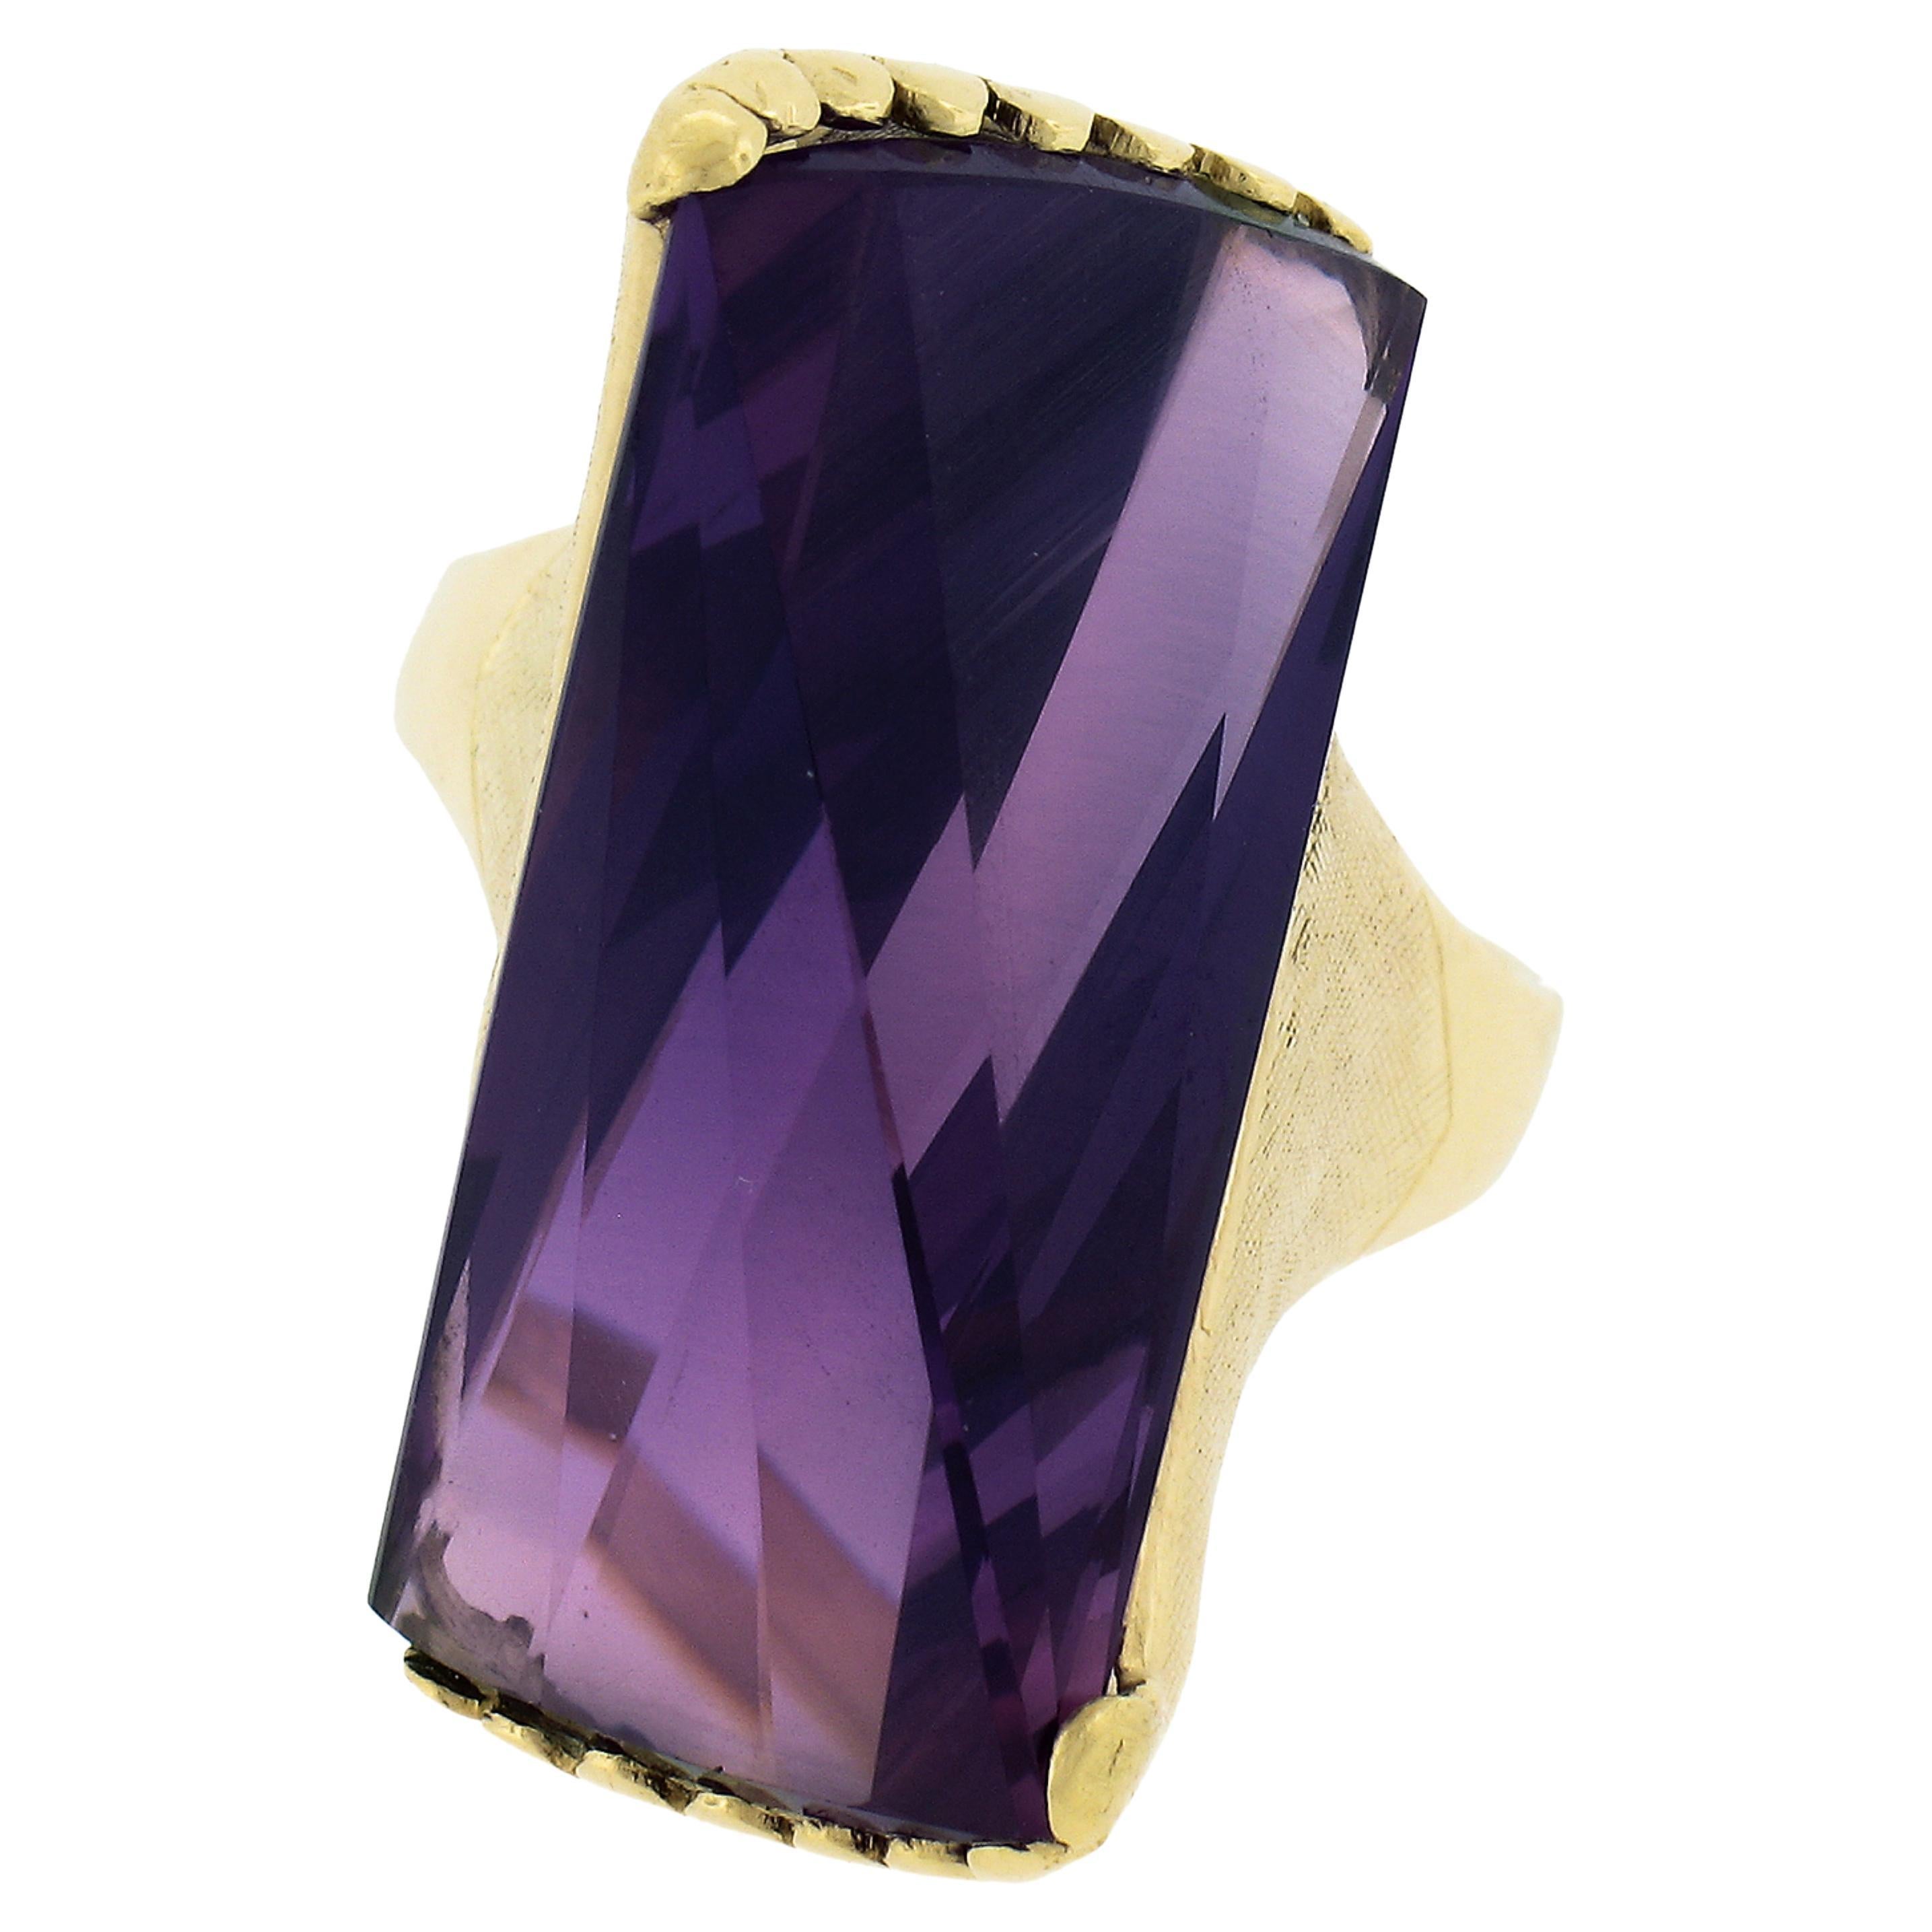 What metal goes best with Alexandrite?